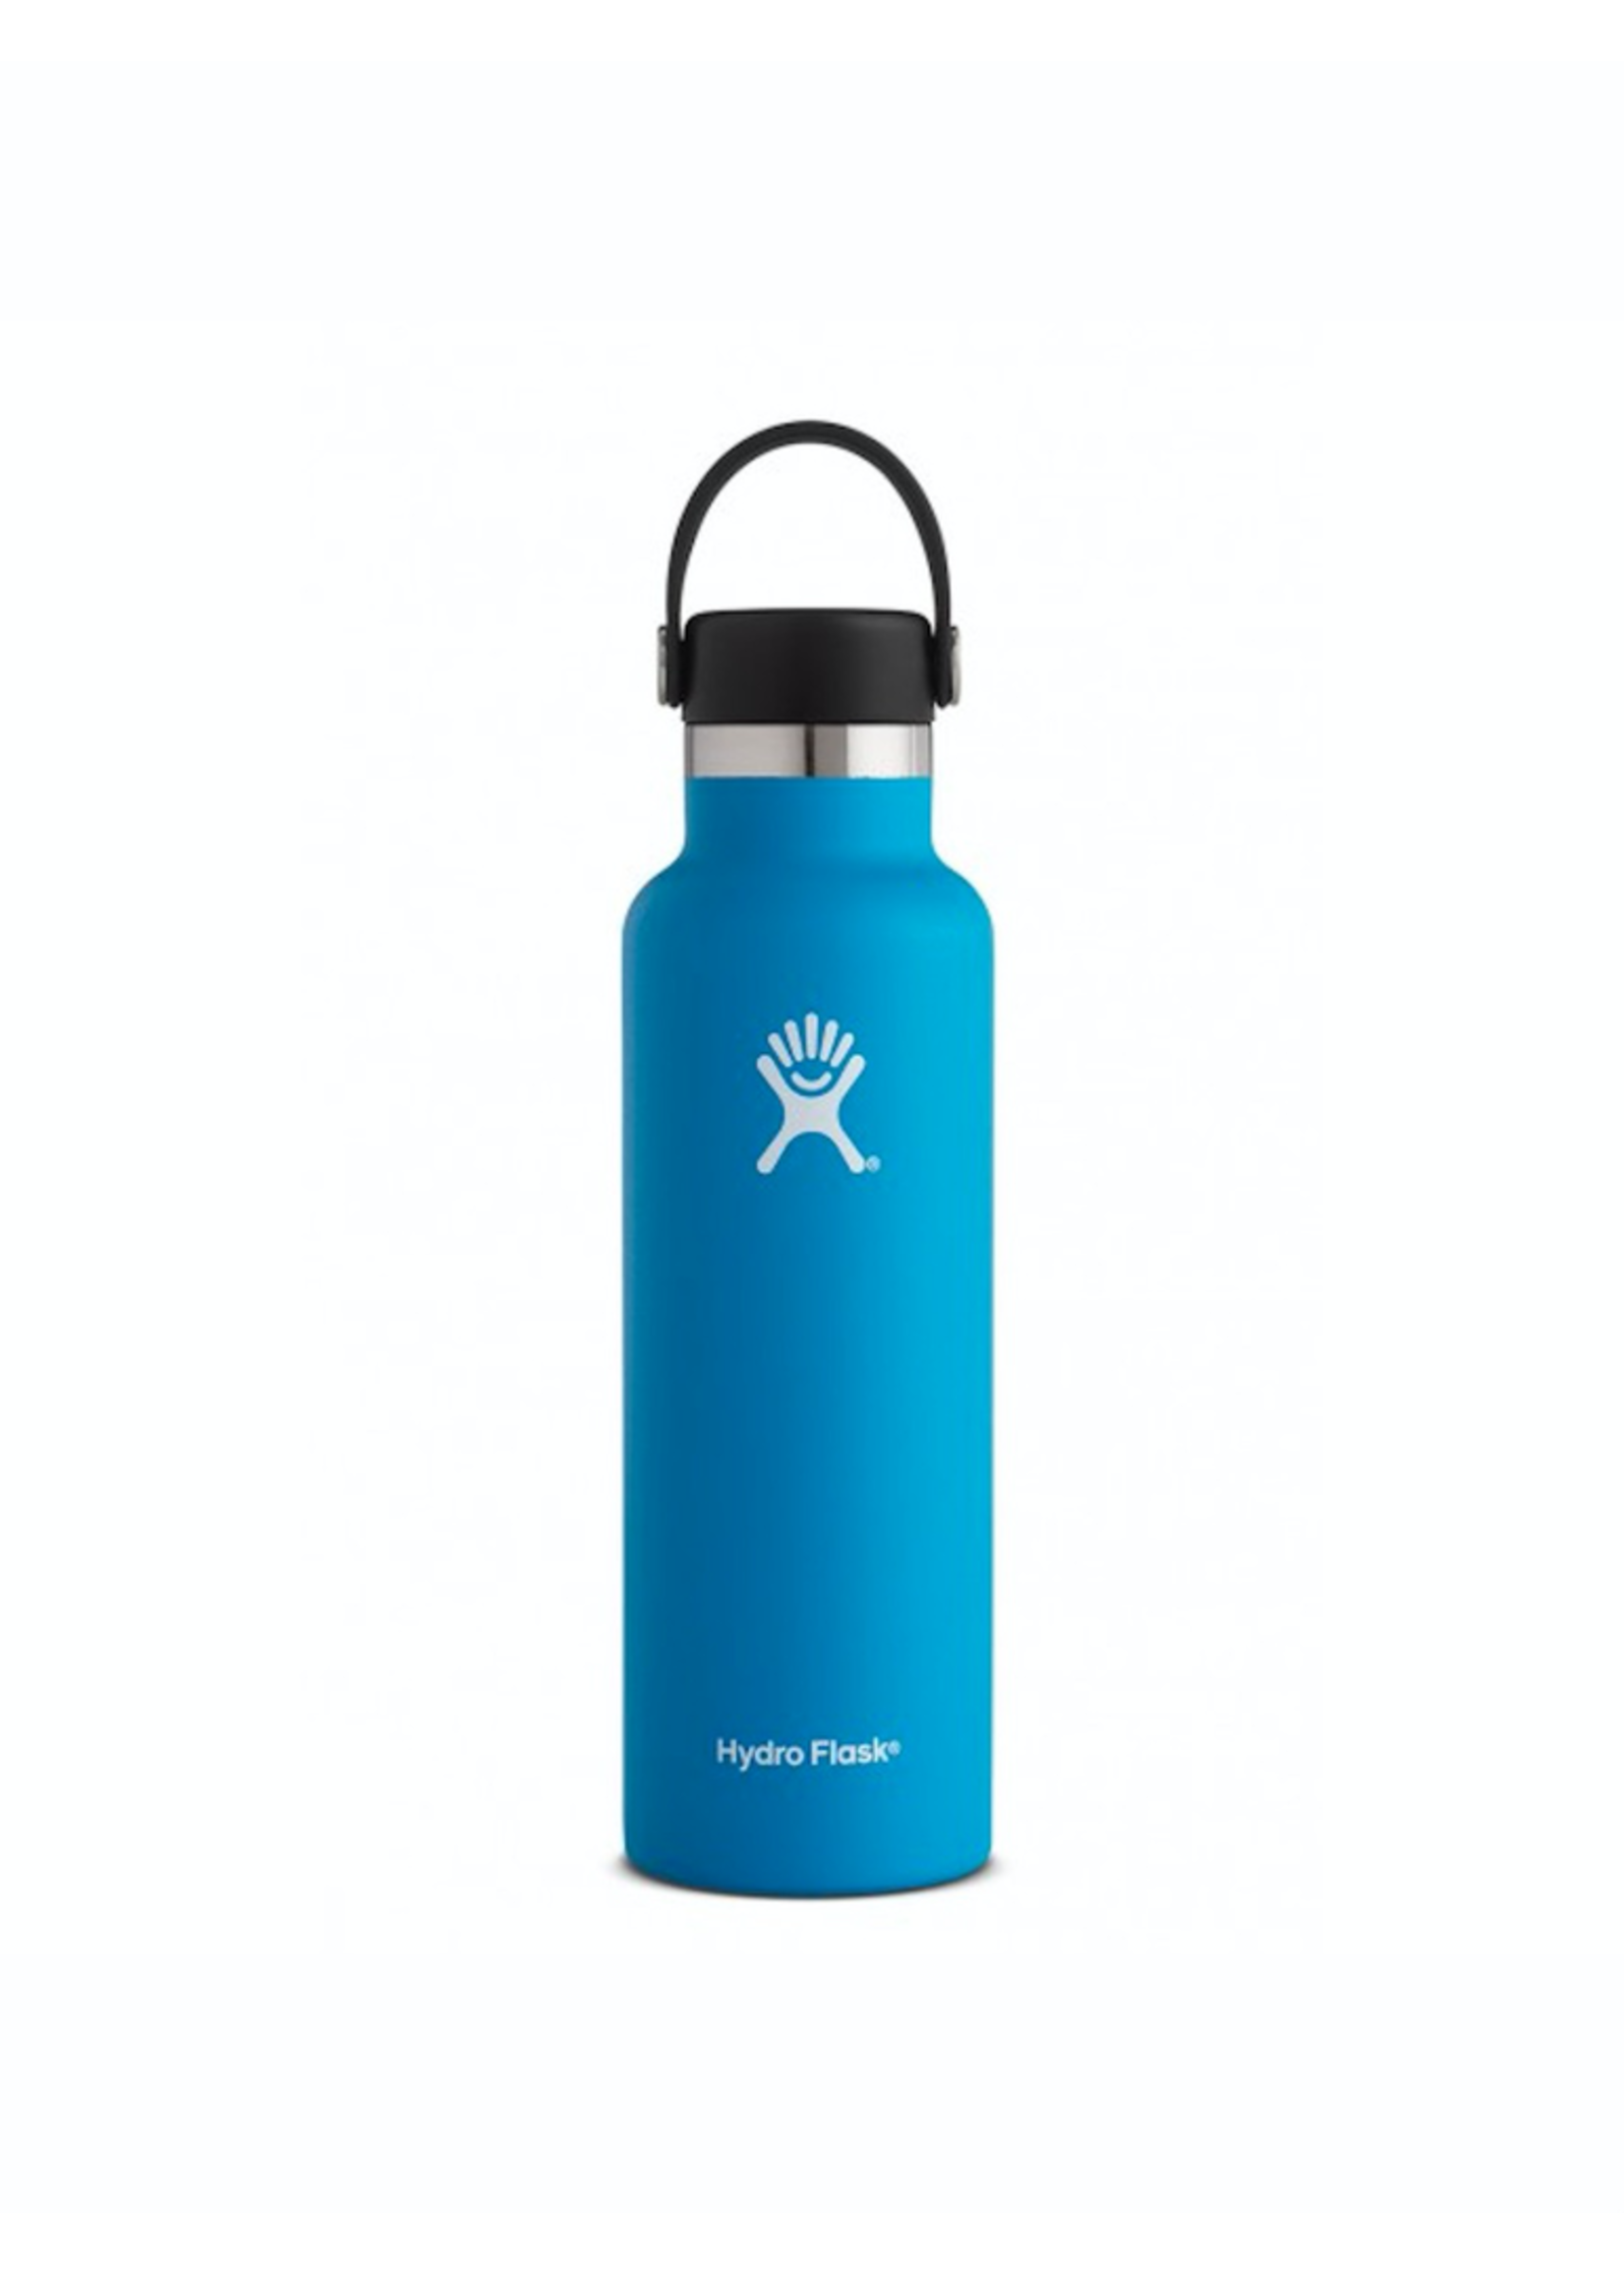 Hydro Flask Hydro Flask, 21 oz Standard Mouth Flex Cap Insulated Stainless Steel Bottle in Pacific